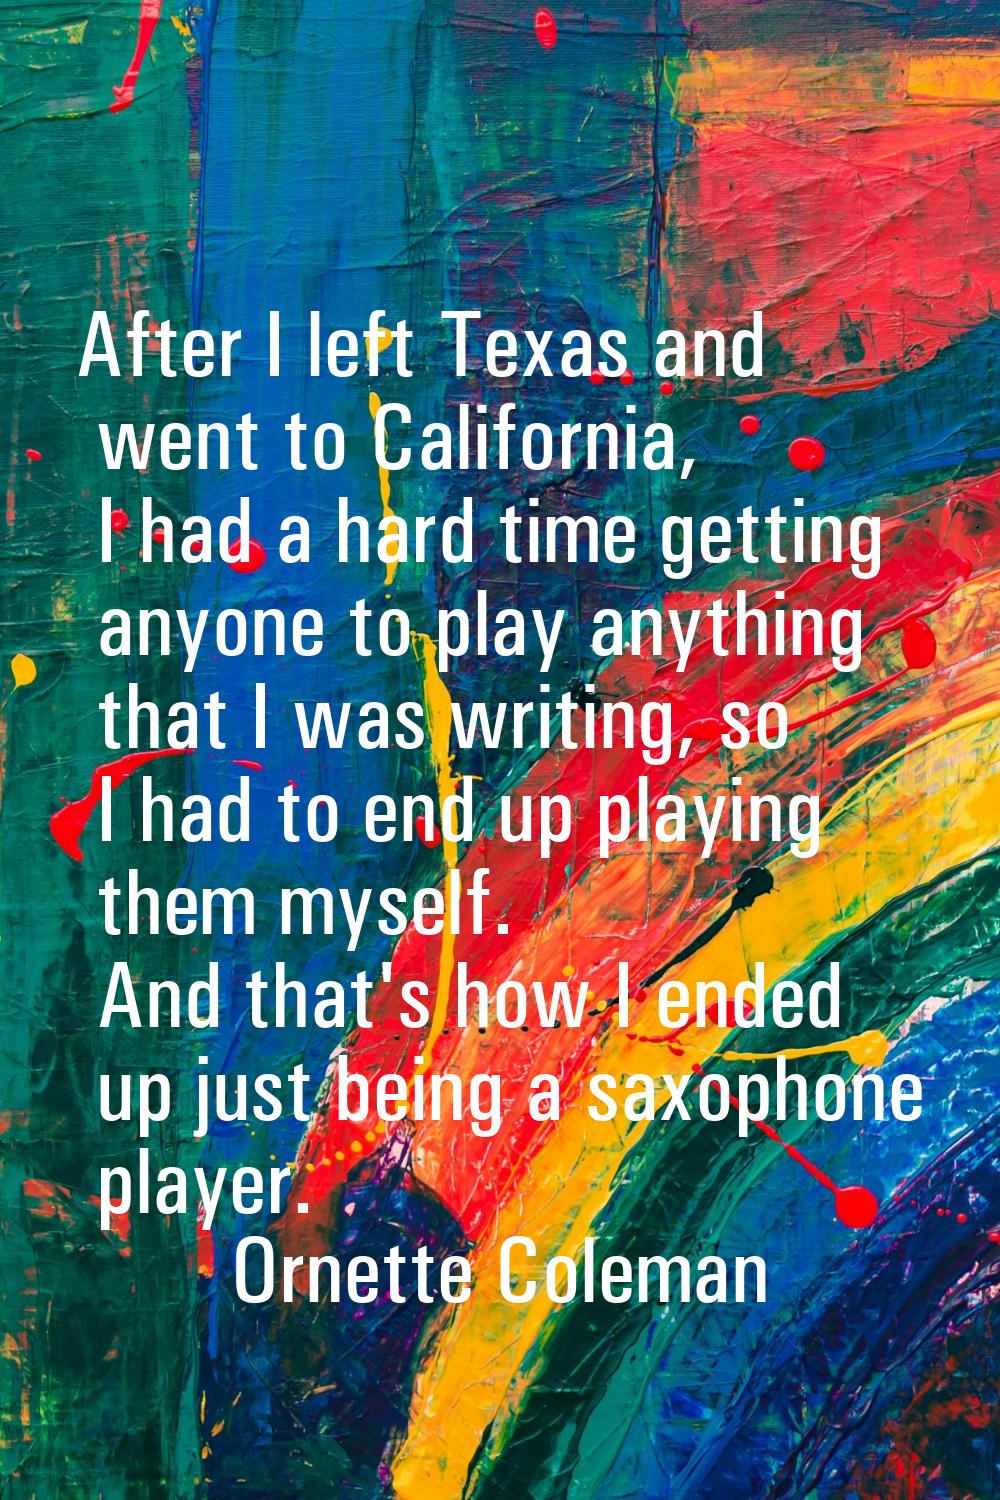 After I left Texas and went to California, I had a hard time getting anyone to play anything that I